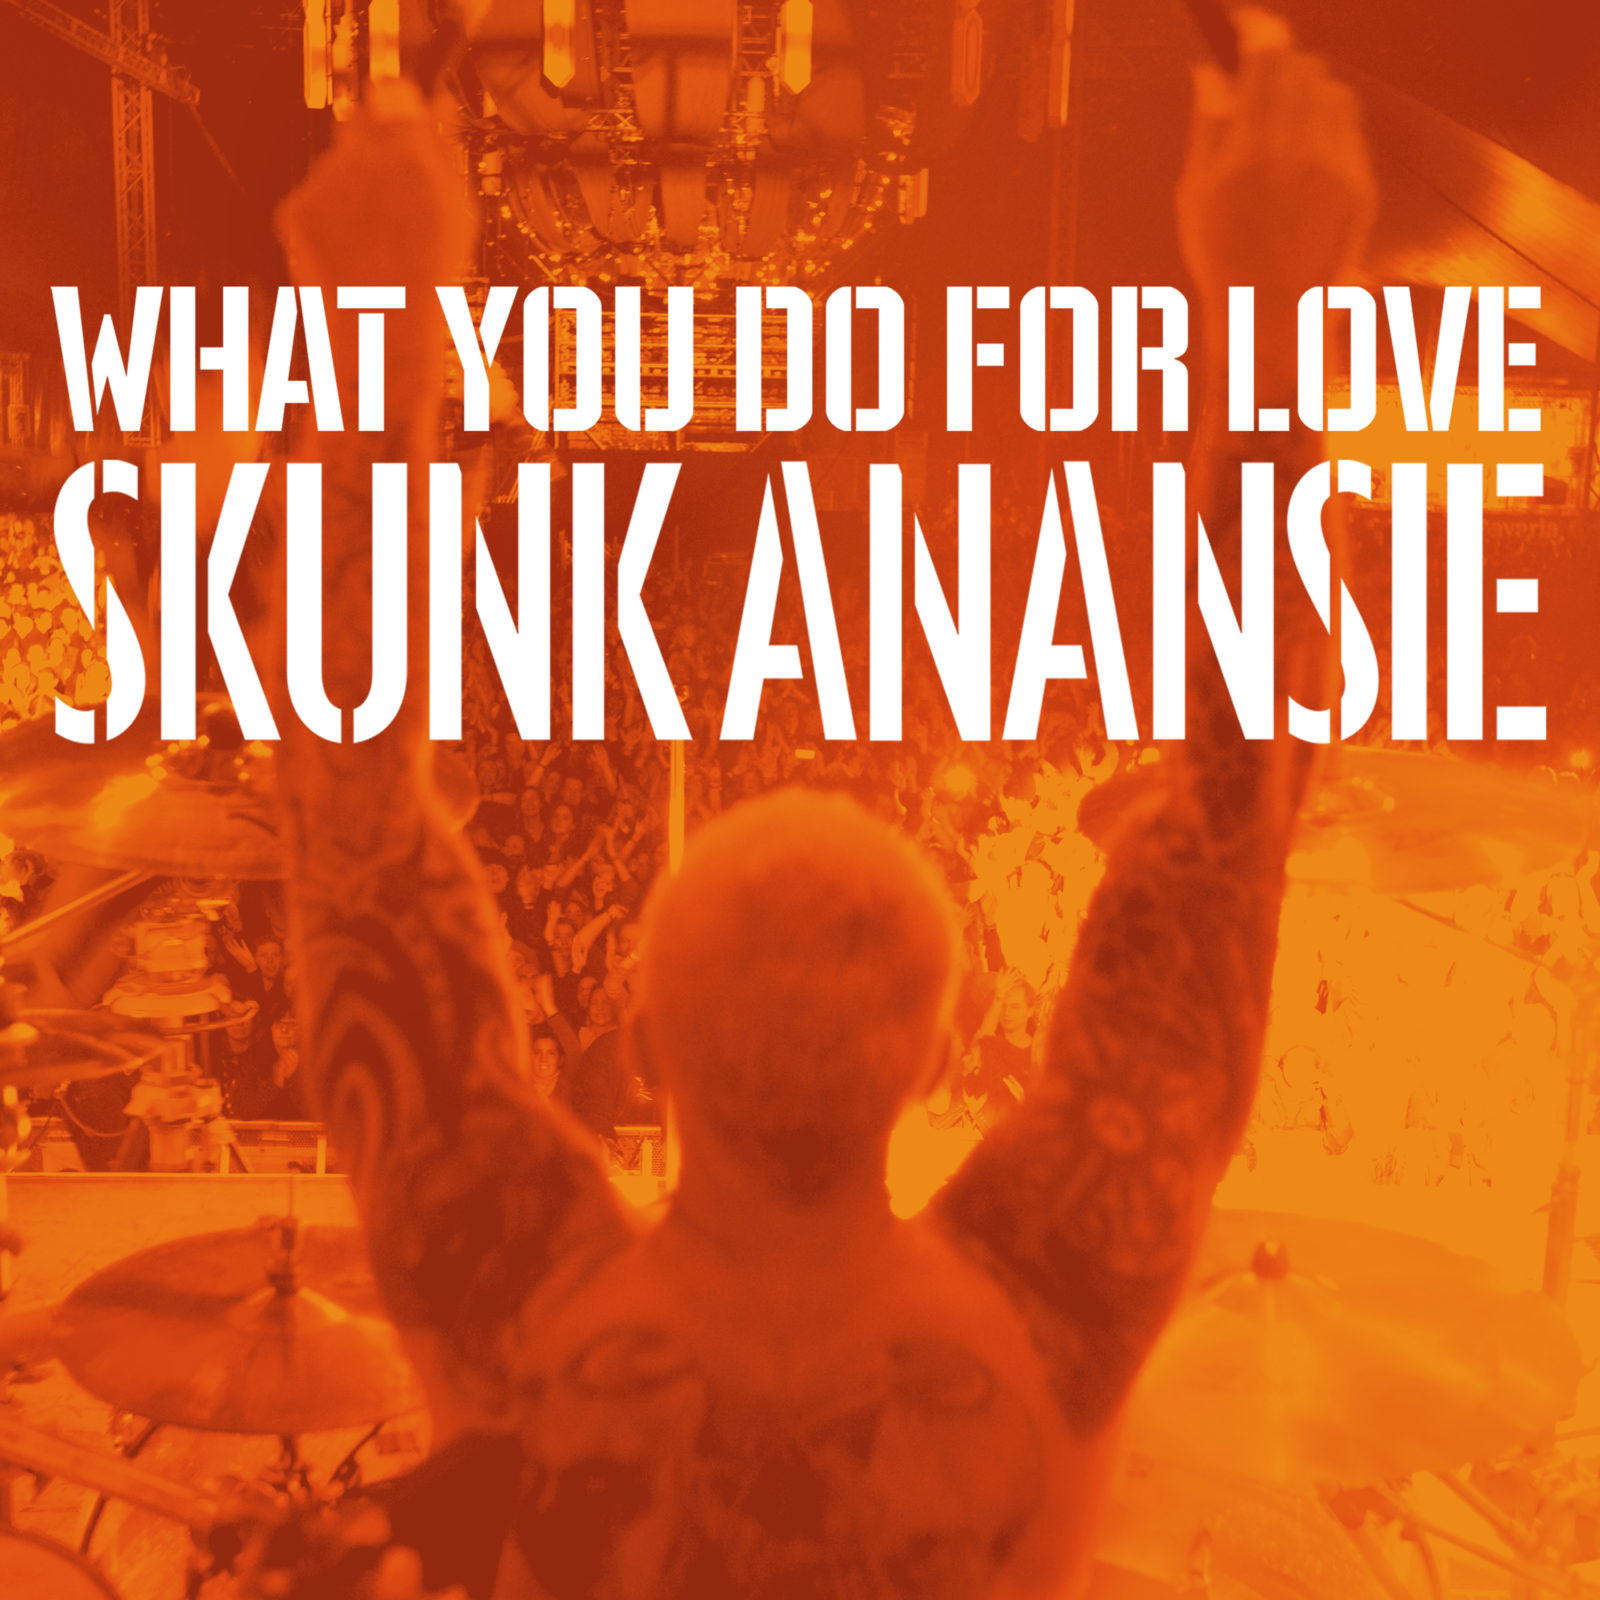 Skunk Anansie - What you do for love